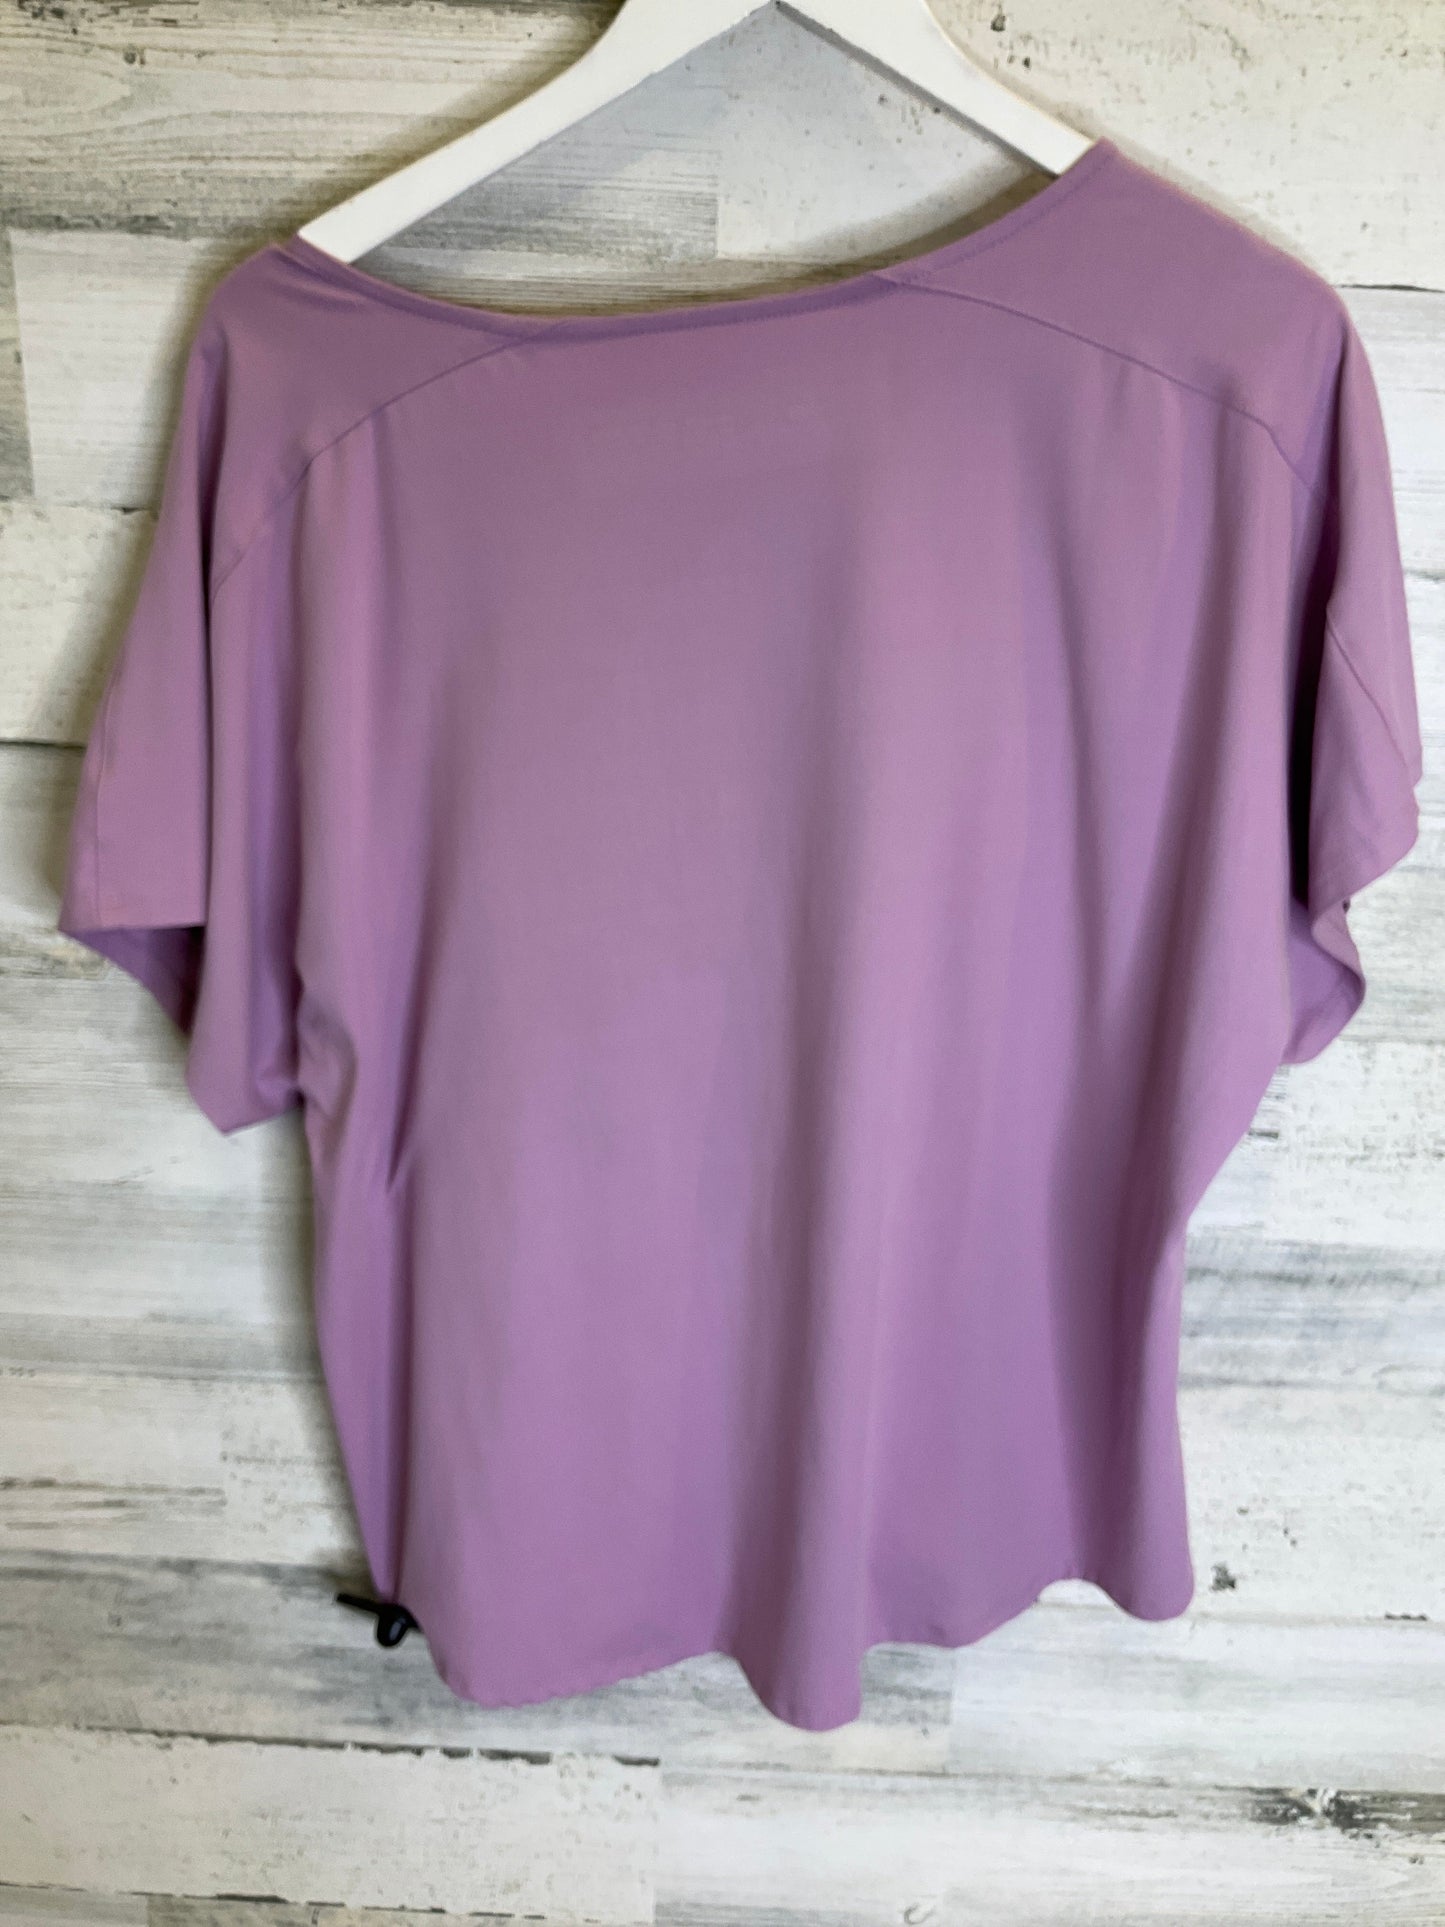 Purple Top Short Sleeve Tranquility, Size Xxl